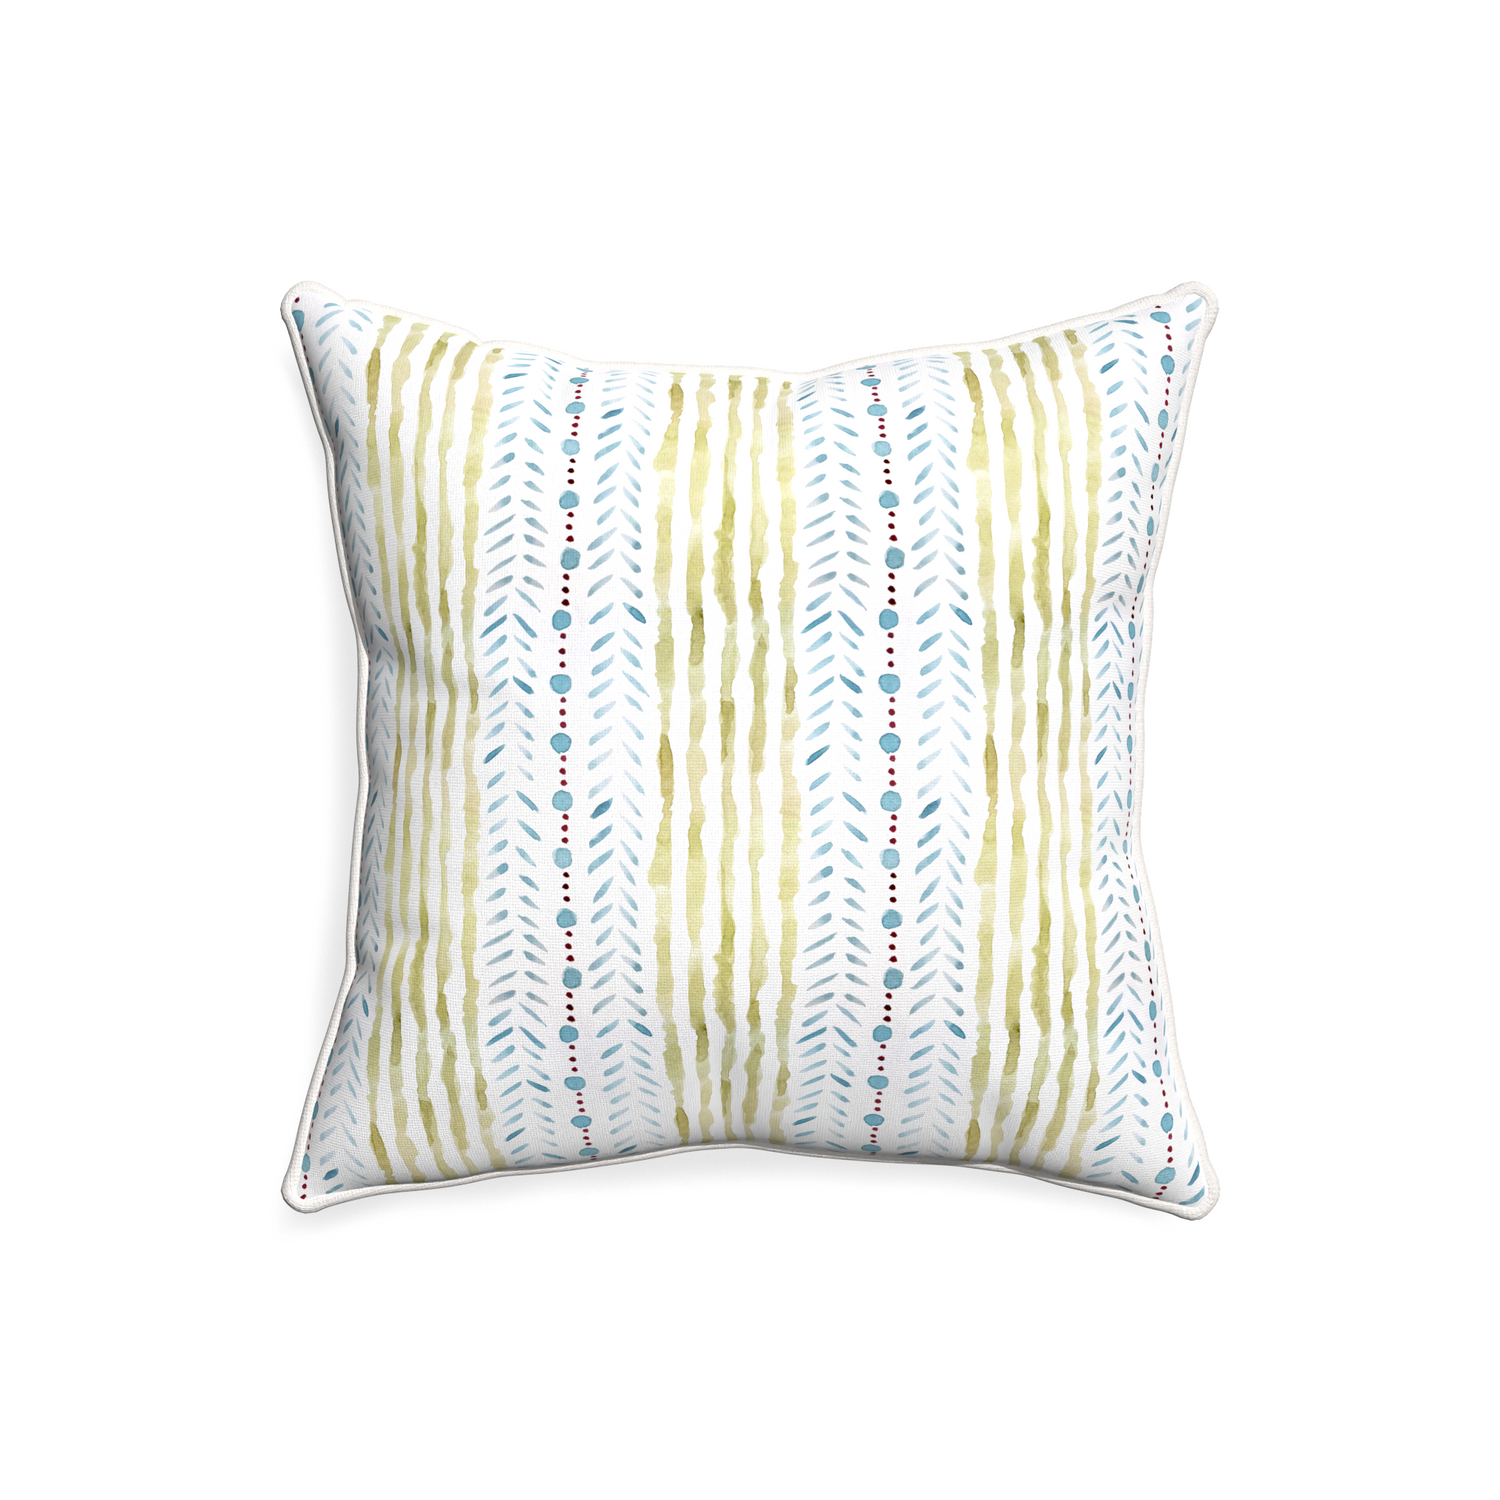 20-square julia custom pillow with snow piping on white background